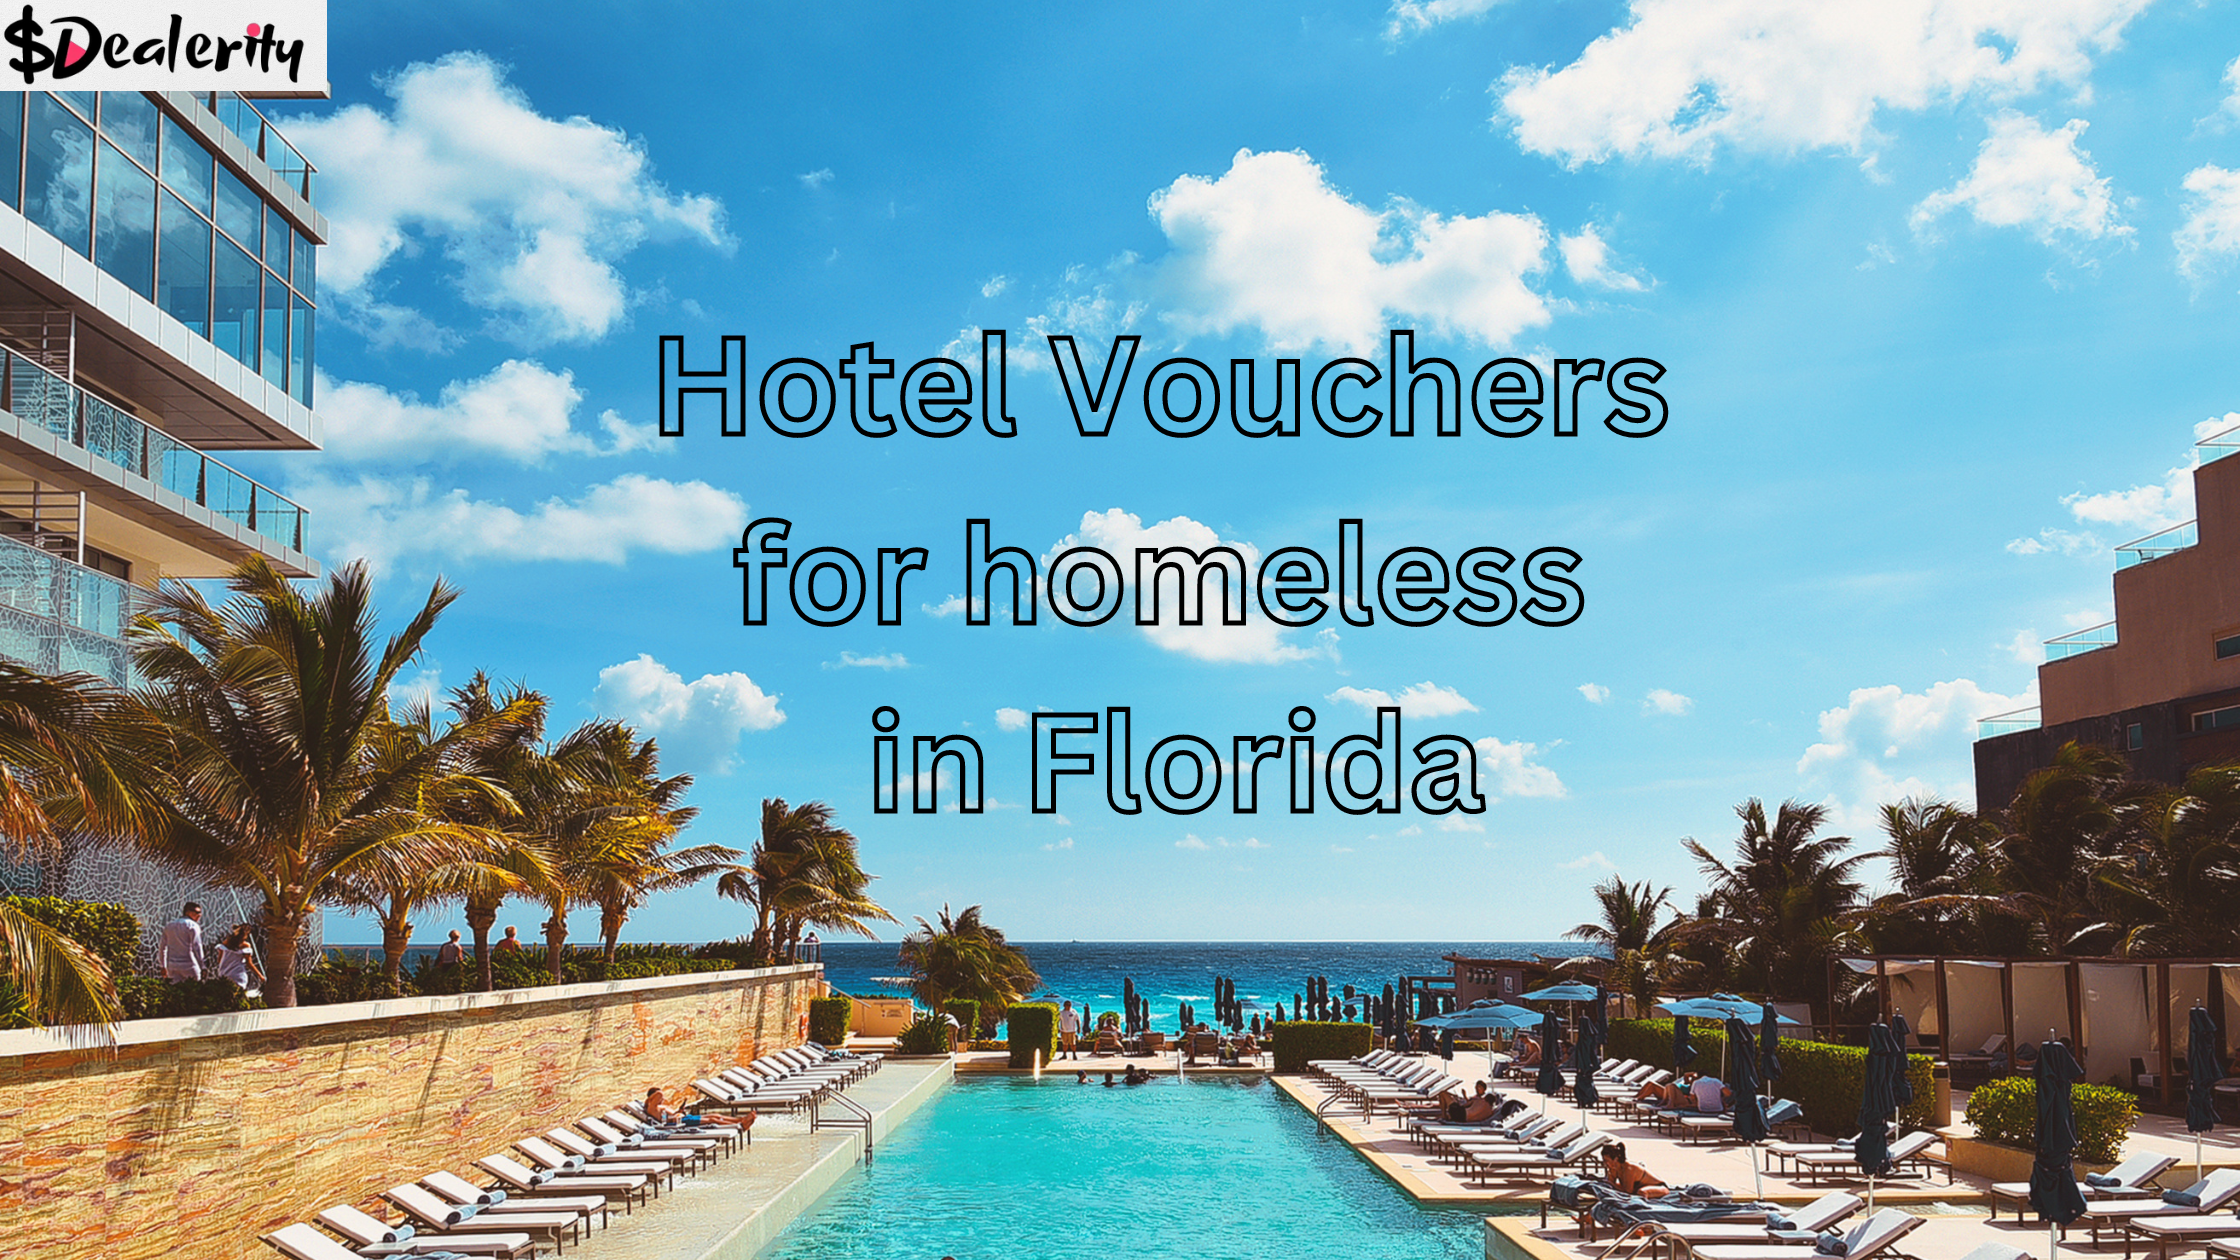 Hotel Vouchers for homeless in Florida